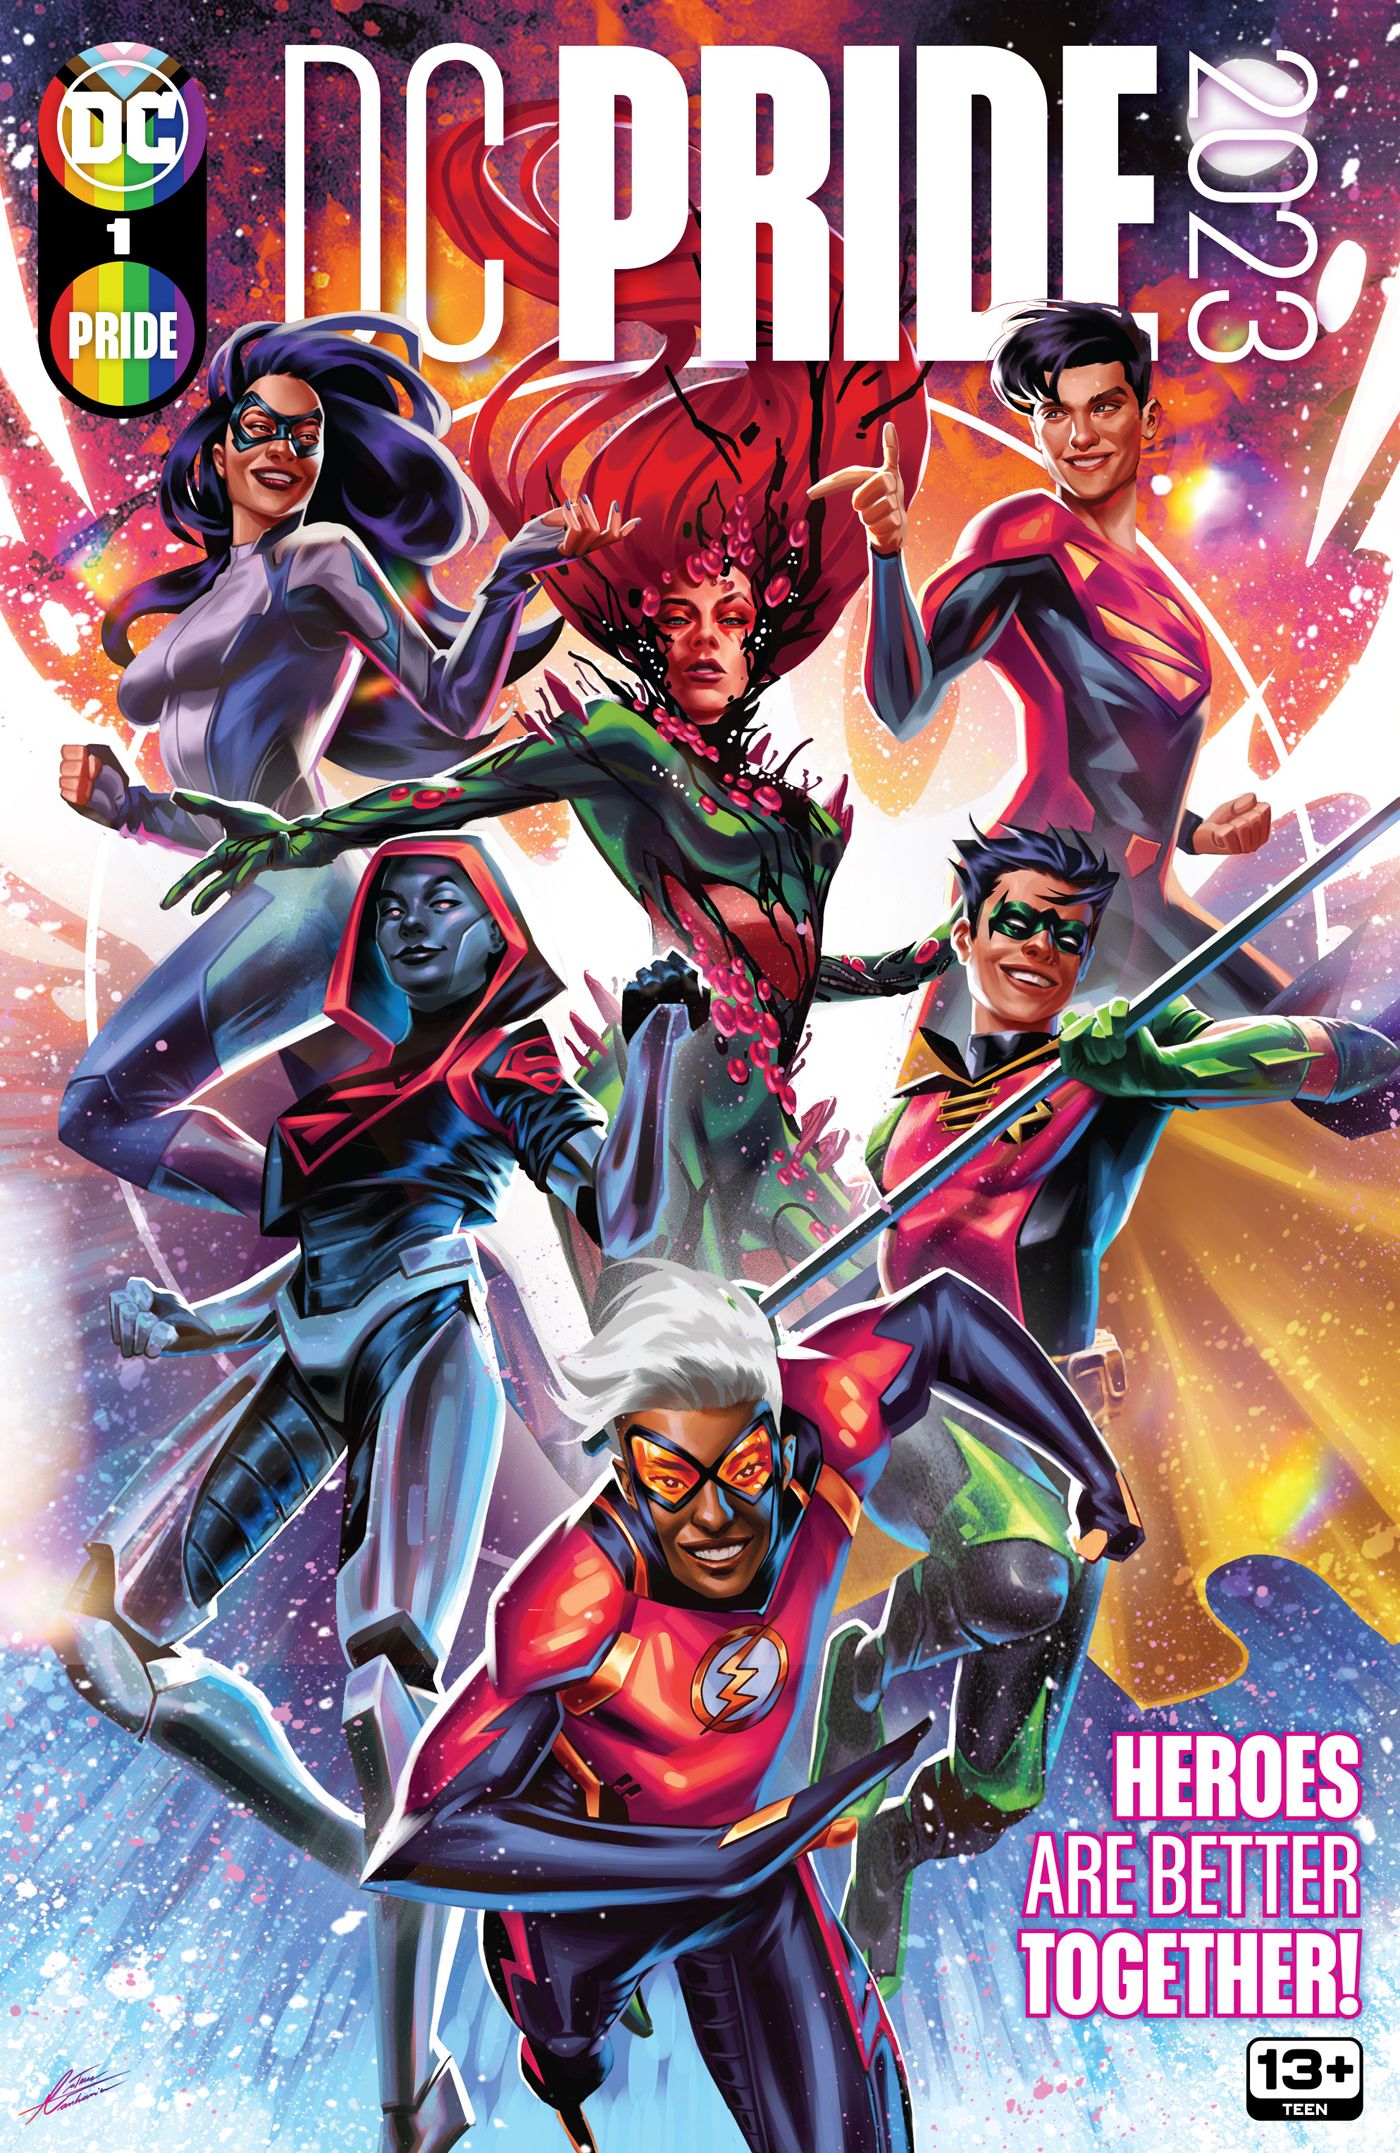 An early look at DC Pride 2023 #1 (2023) from DC Comics.